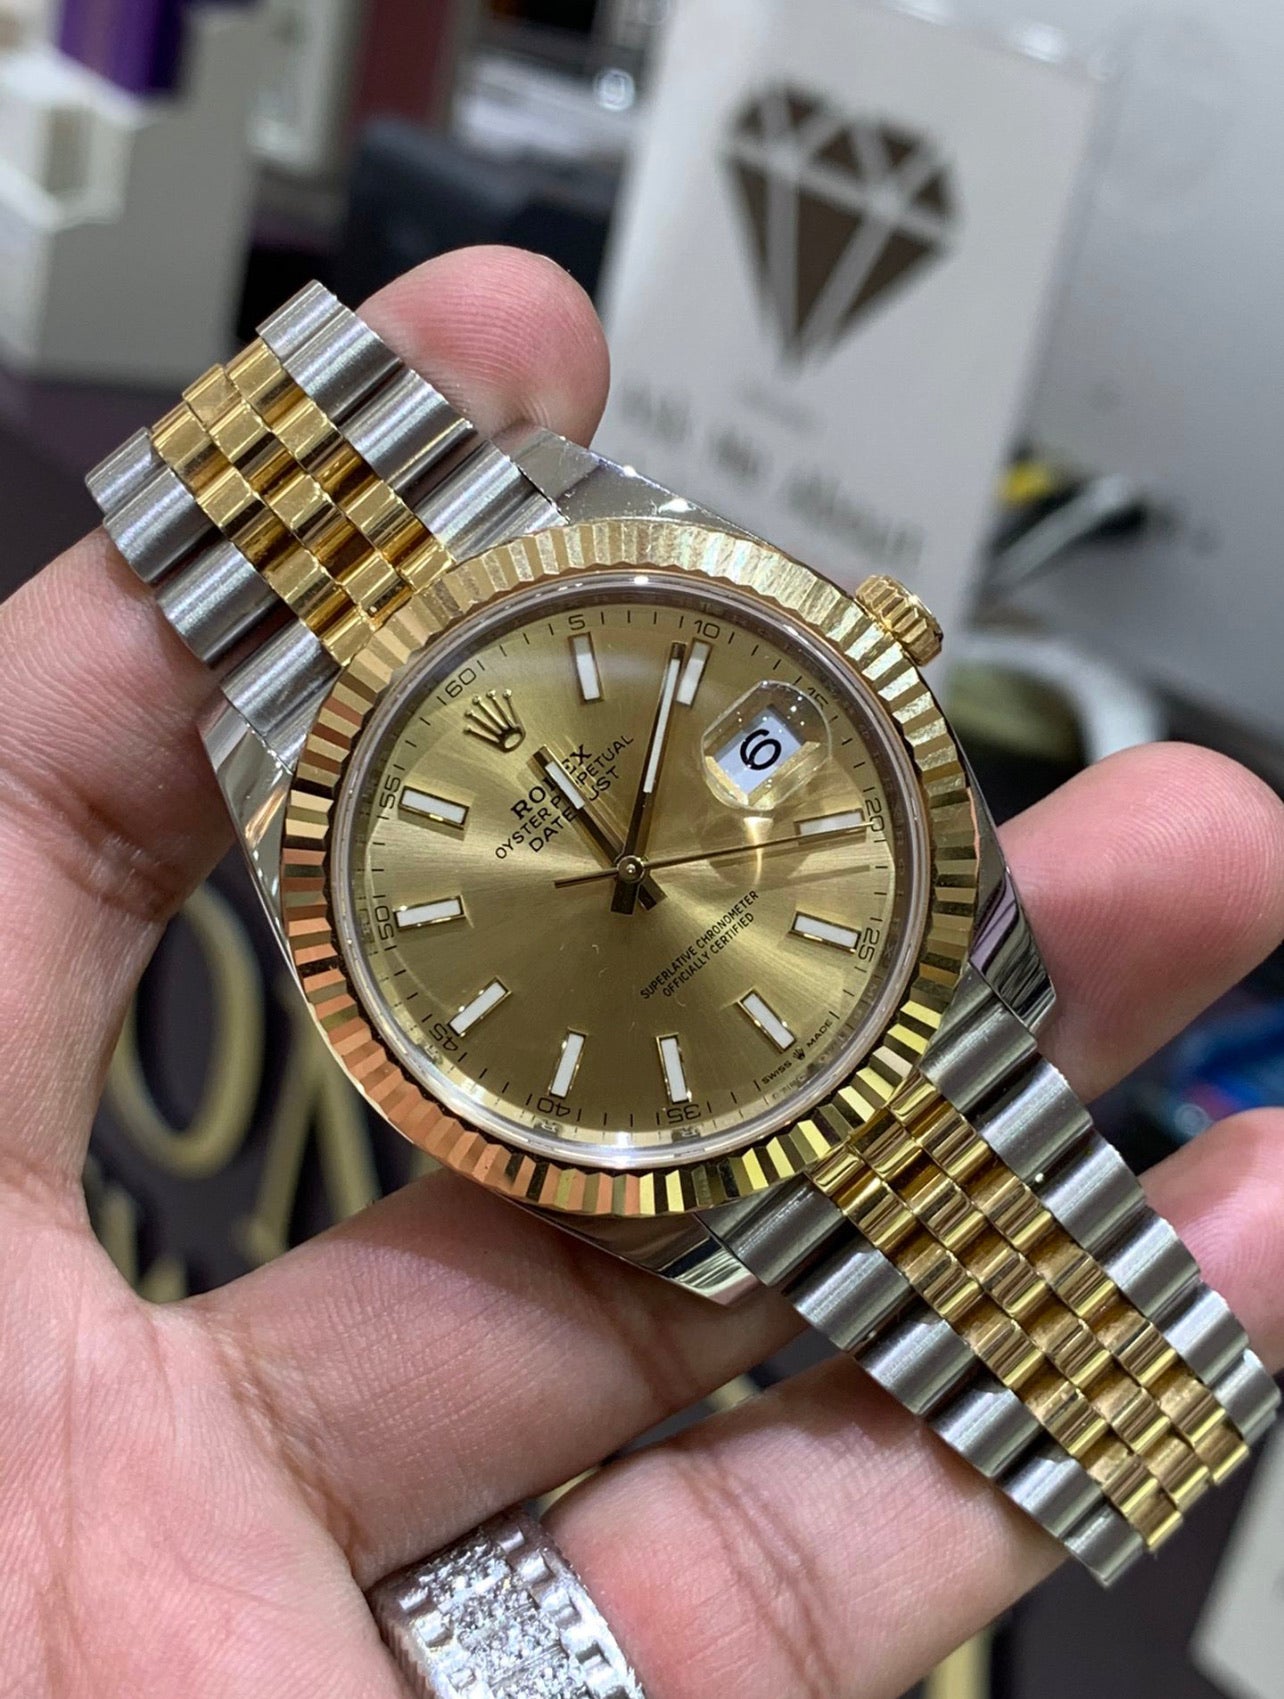 Rolex Datejust Oyster Perpetual 18K Yellow Gold and Stainless Steel 66288